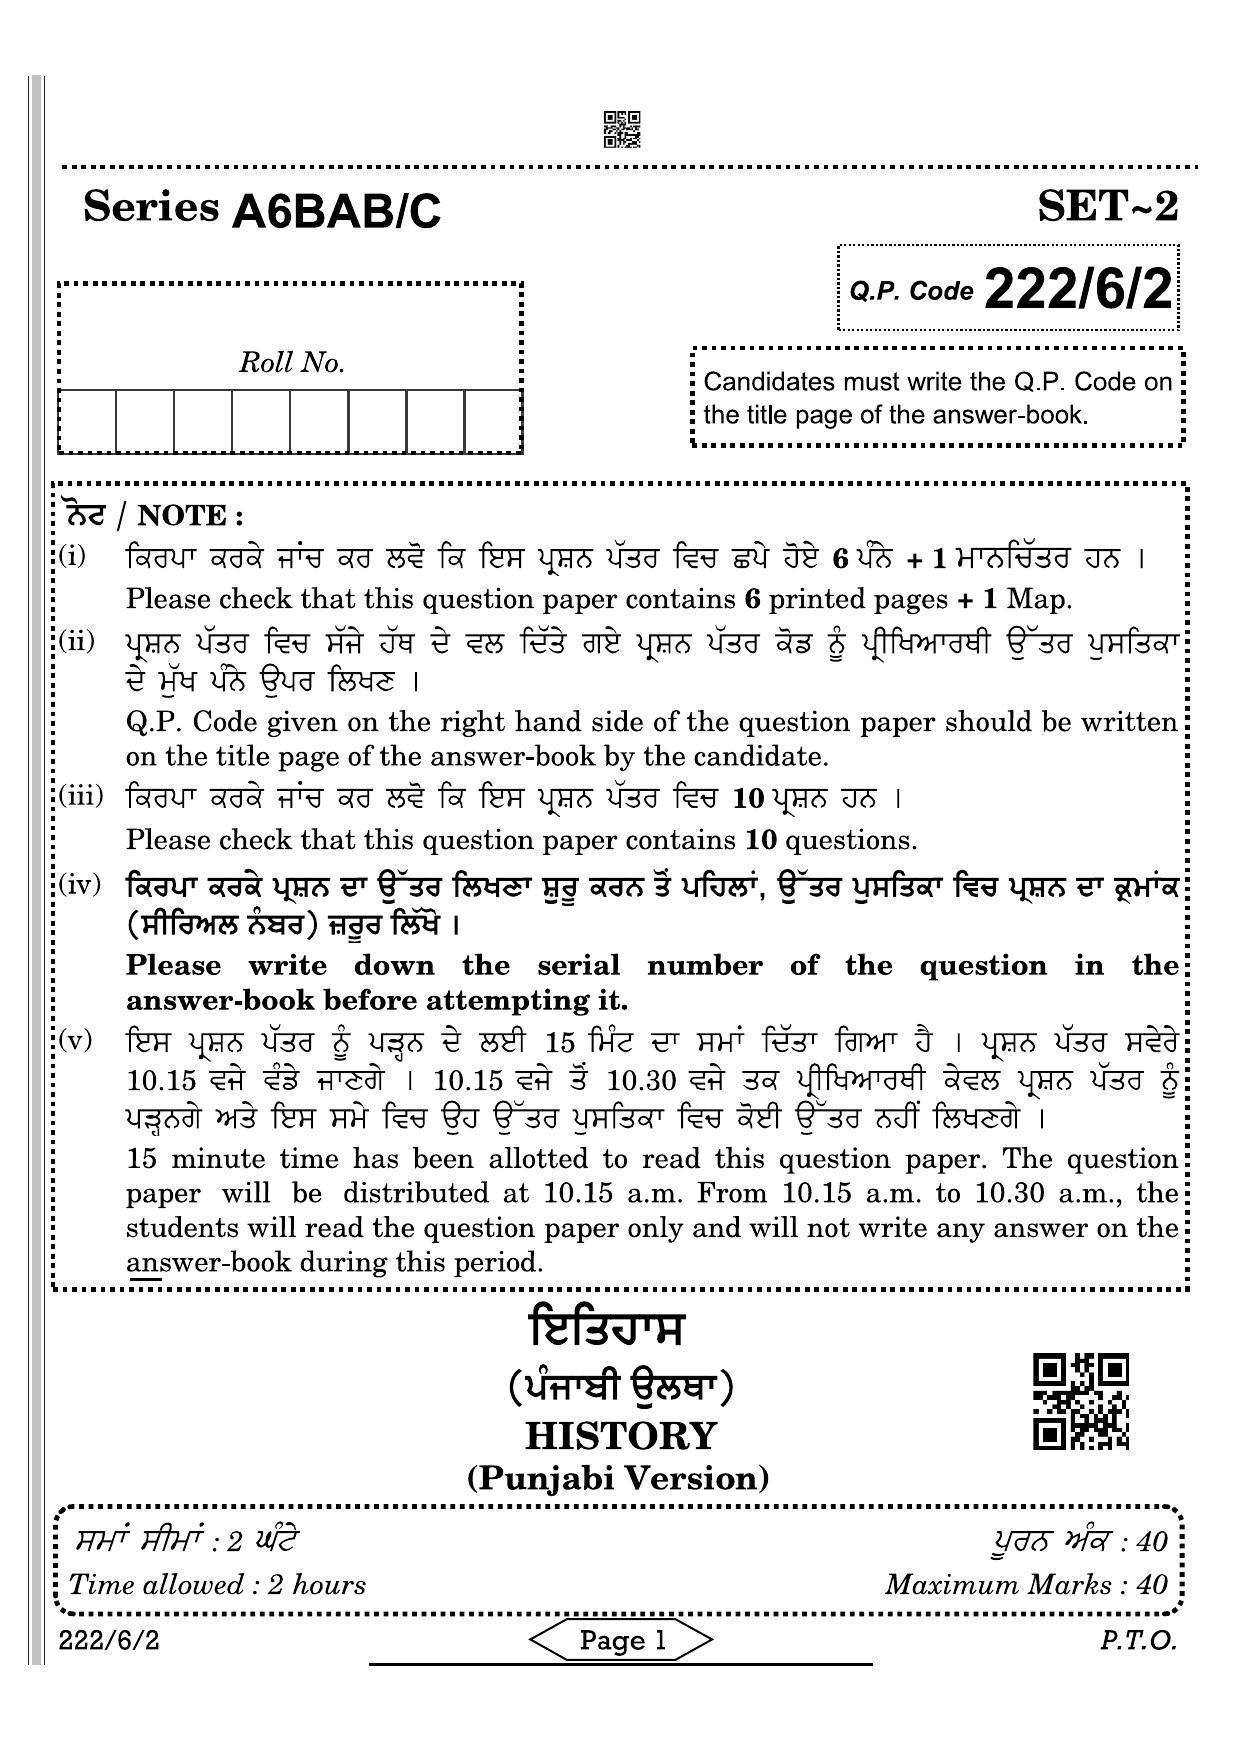 CBSE Class 12 222-6-2 History Punjabi 2022 Compartment Question Paper - Page 1